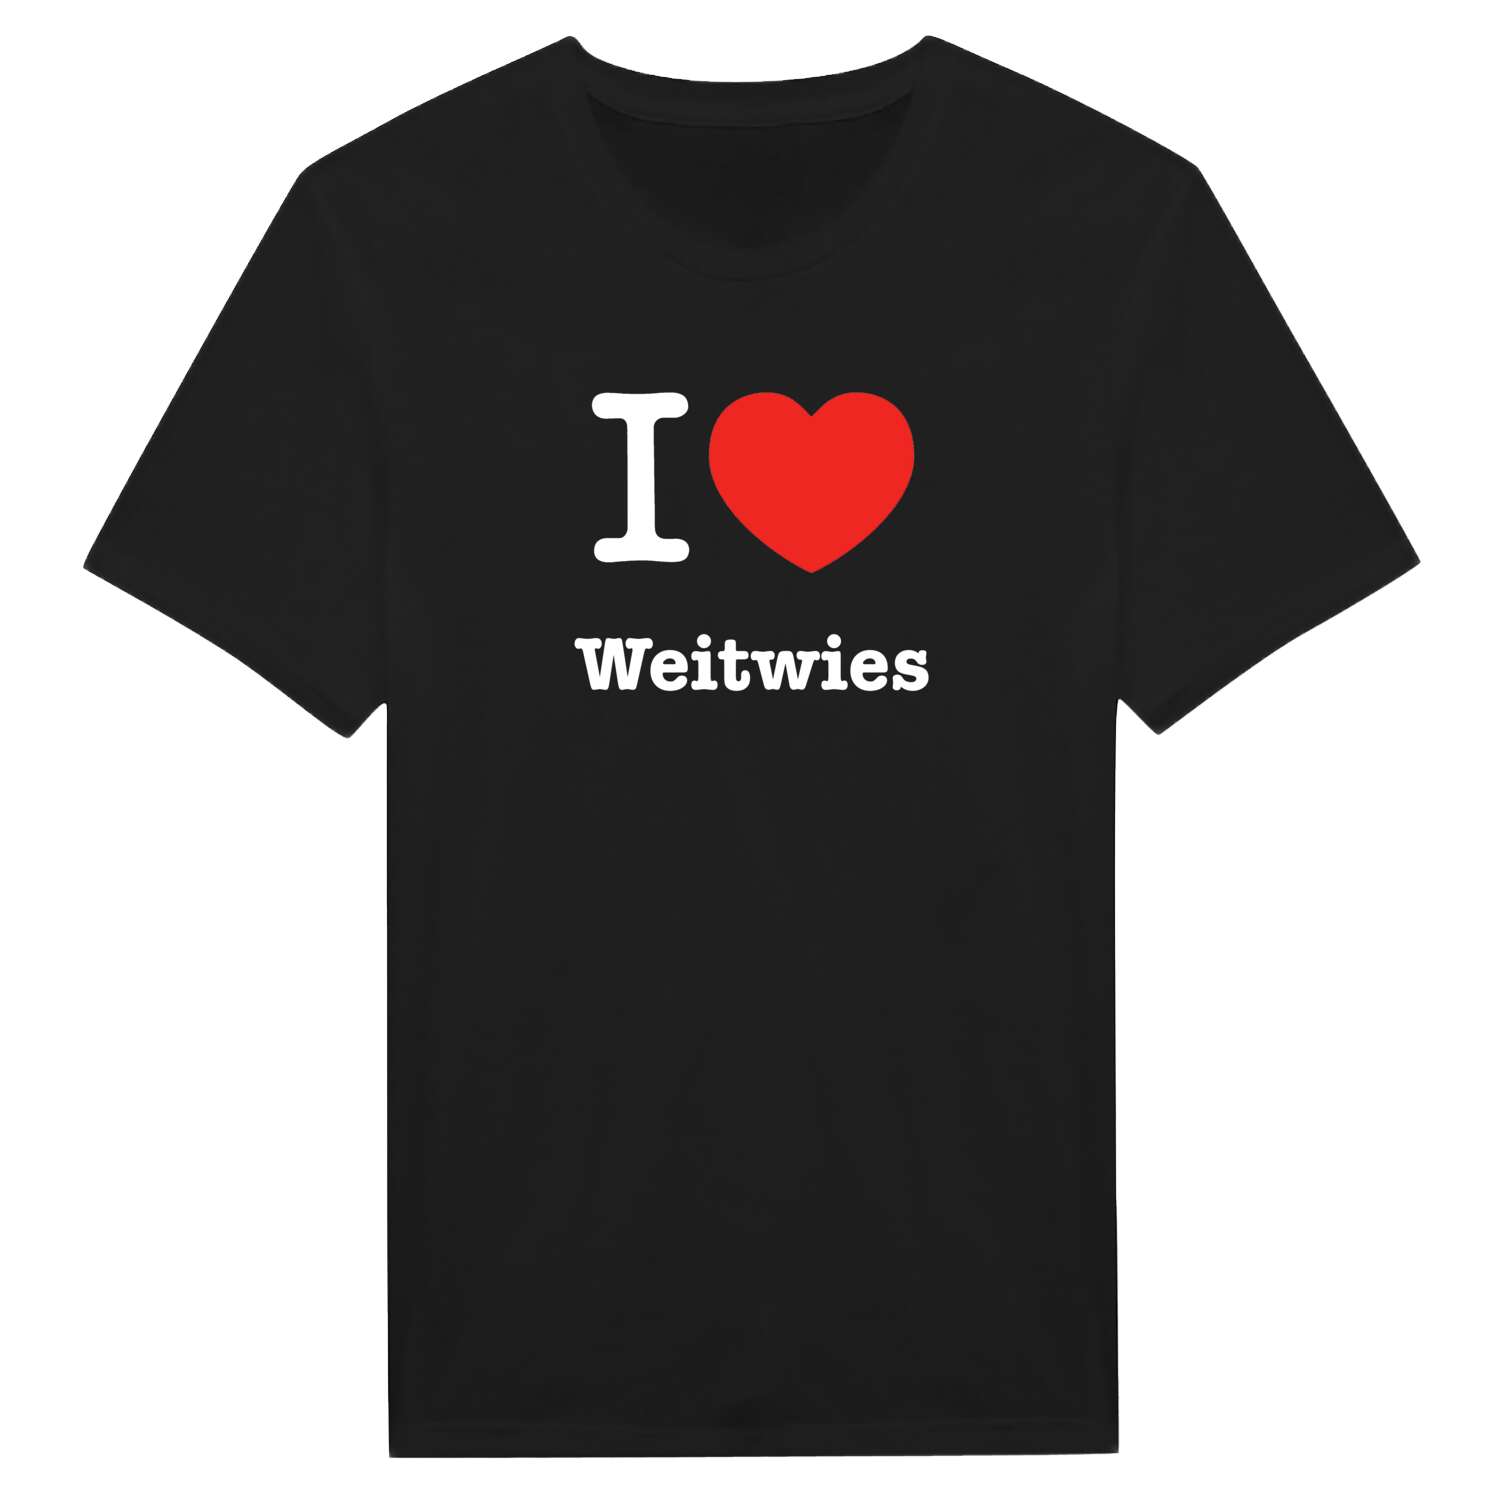 Weitwies T-Shirt »I love«